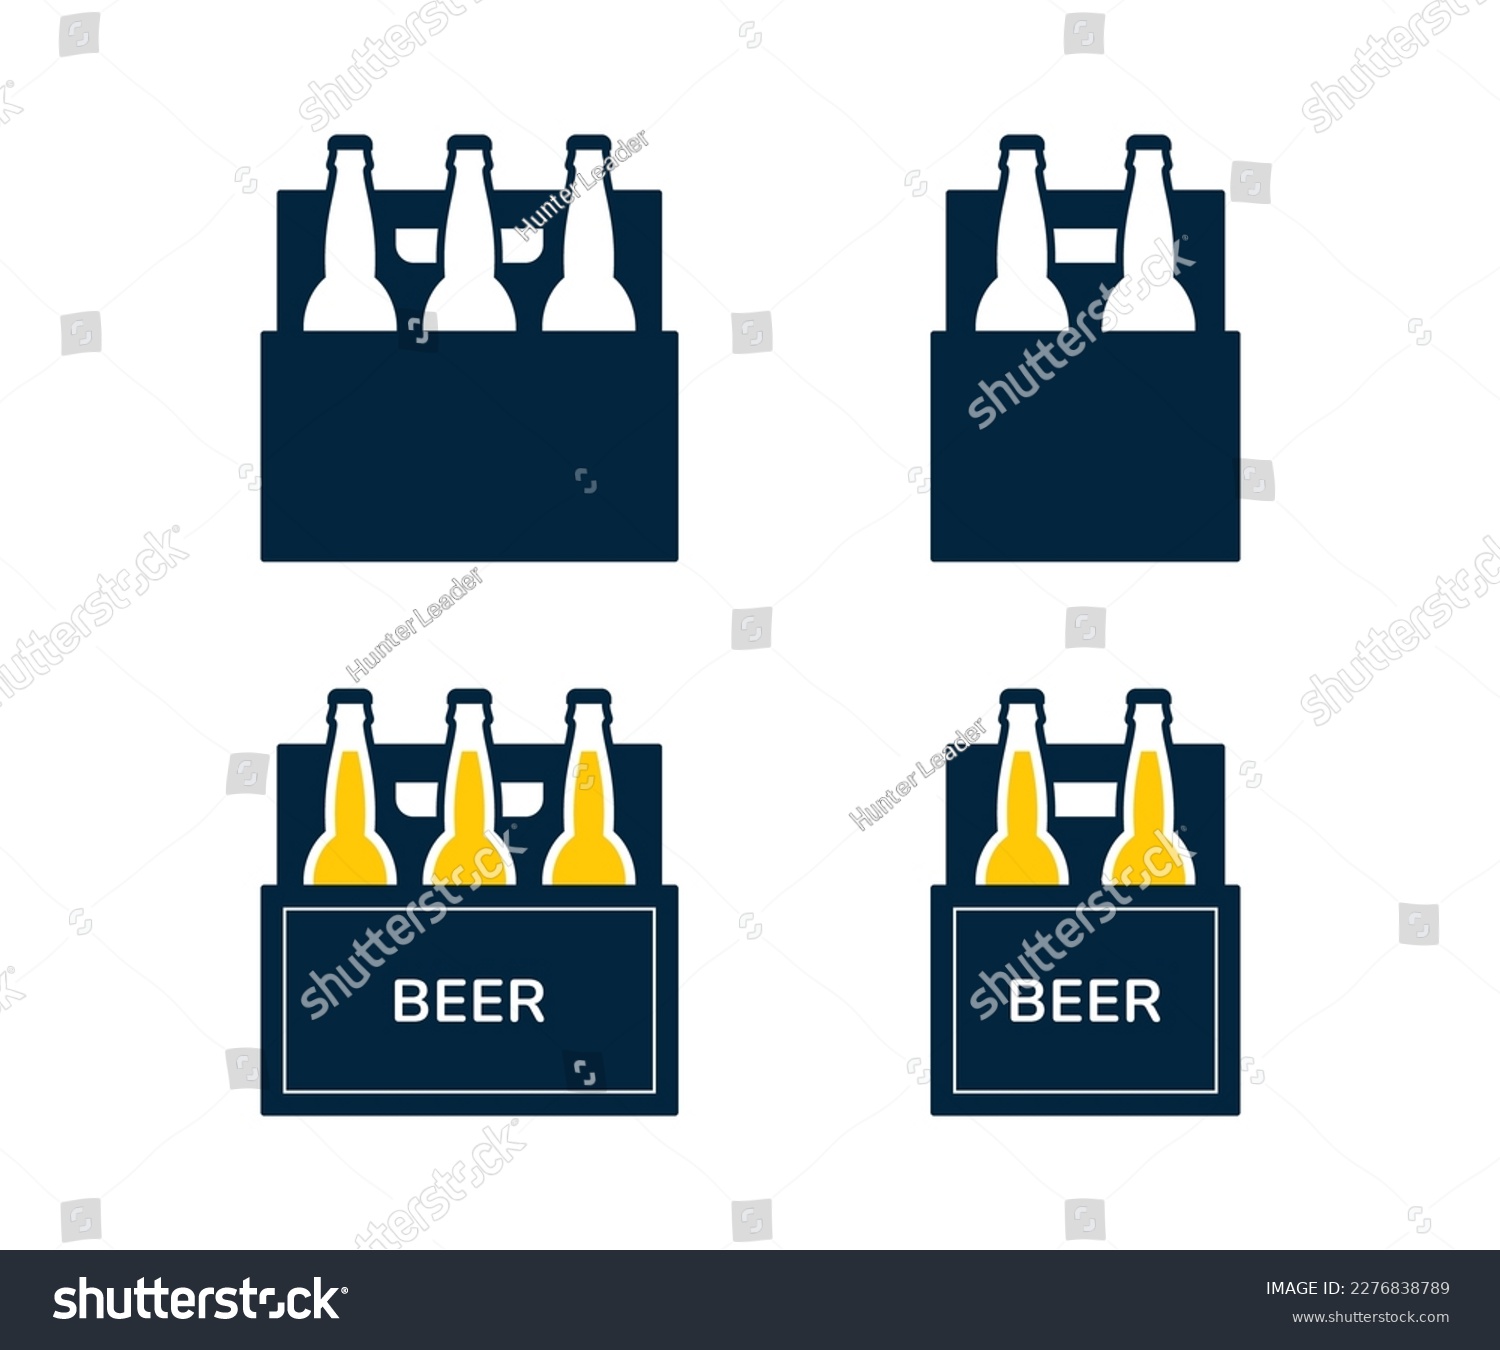 SVG of Beer box icon set. Beer bottle in paper packaging box isolated svg